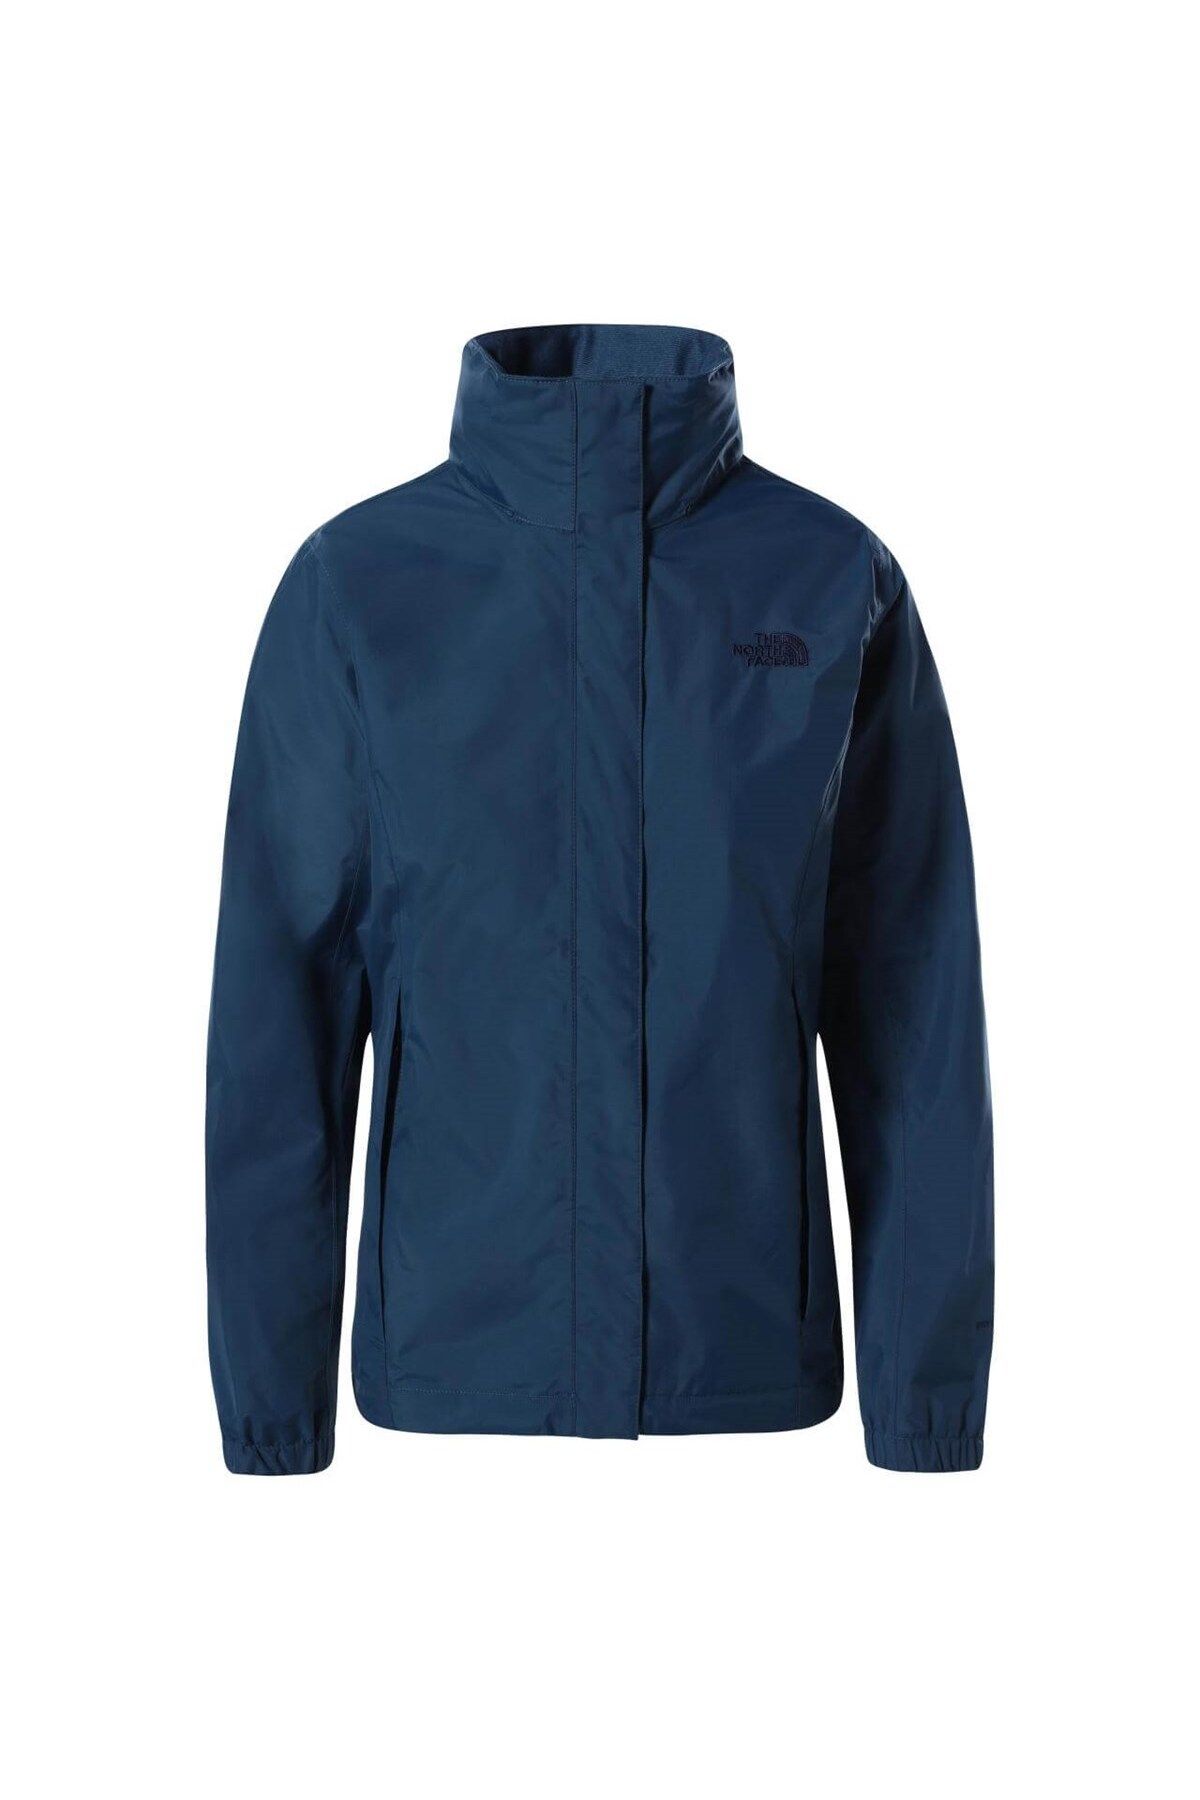 The North Face The Nort Face W Resolve 2 Kadın Mont - Nf0a2vcubh71